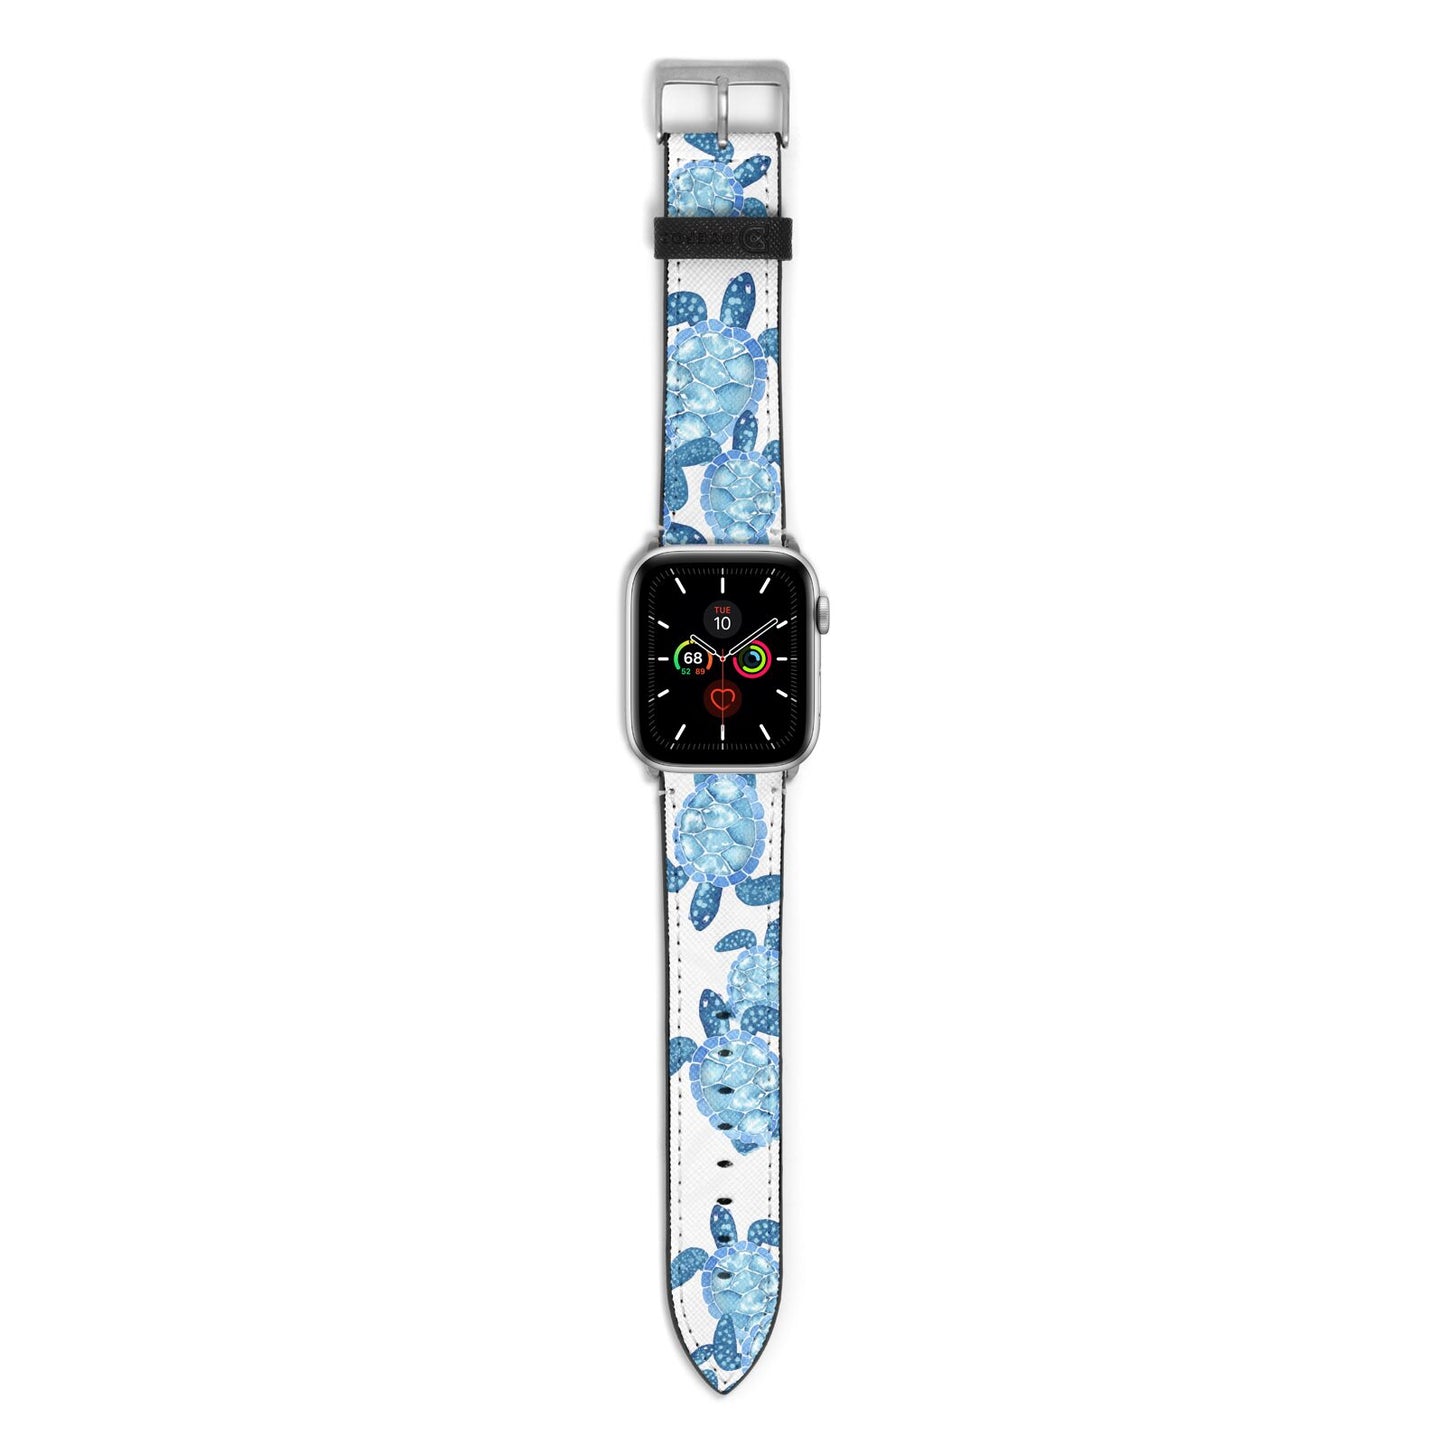 Turtle Apple Watch Strap with Silver Hardware